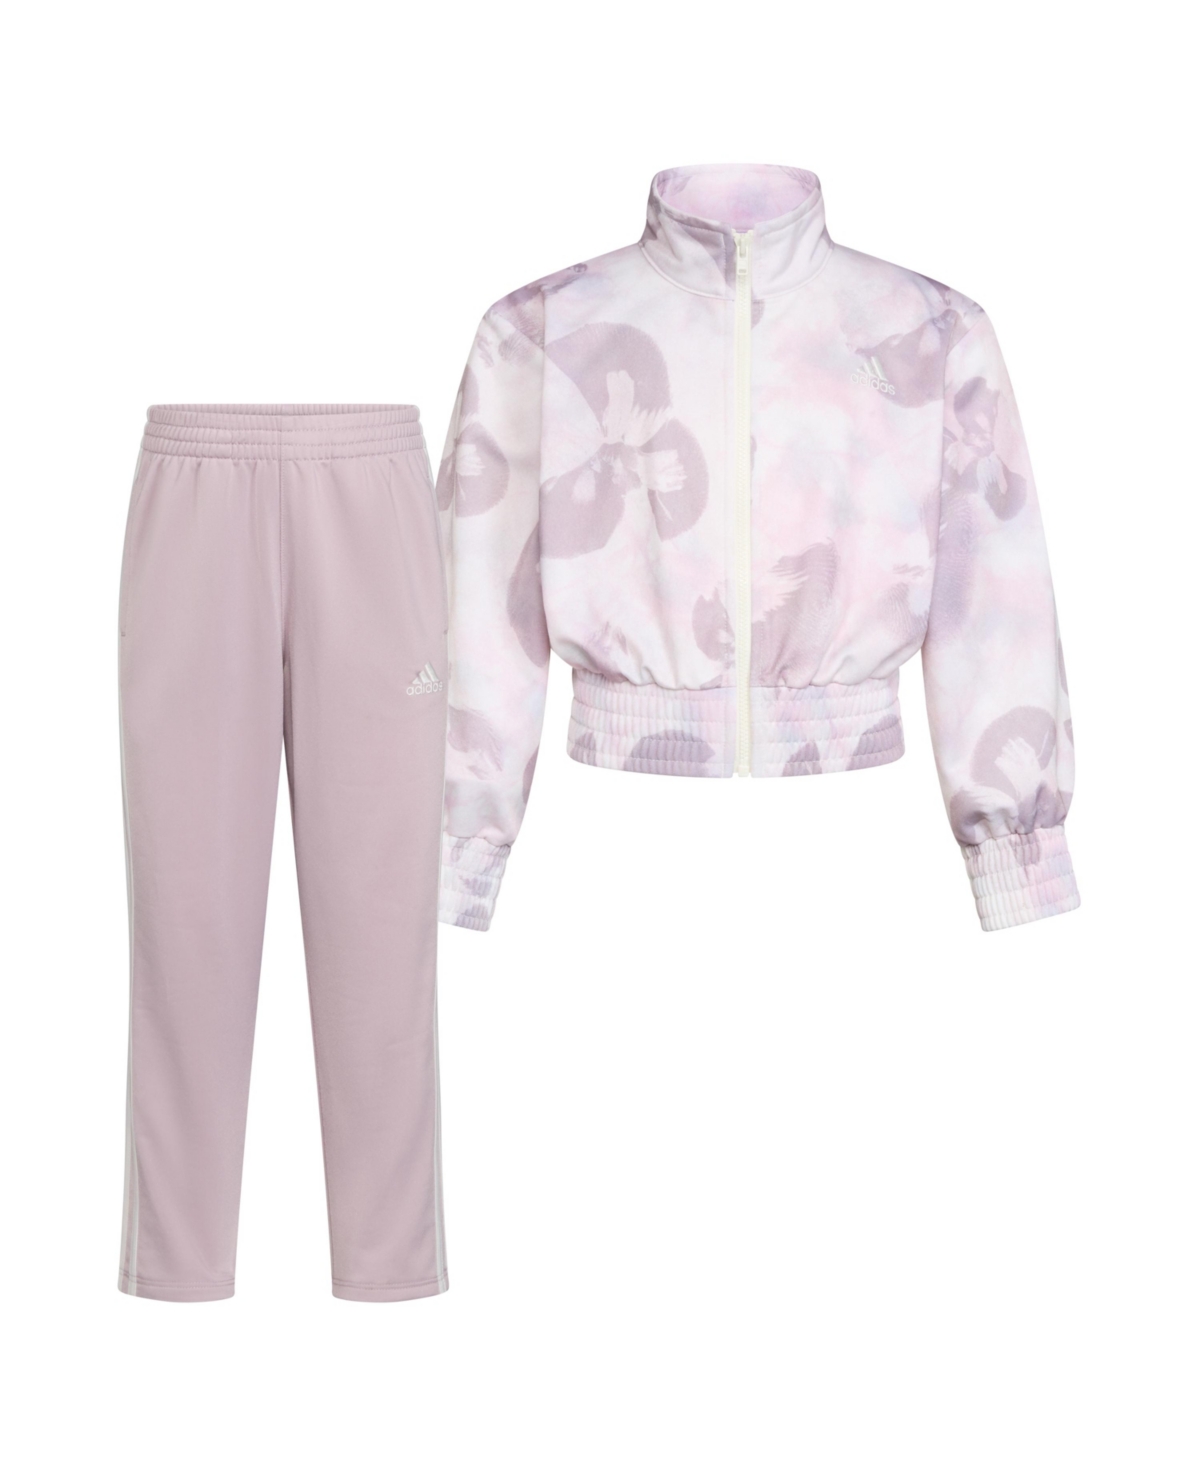 Shop Adidas Originals Toddler Girls Printed Fashion Tricot Jacket And Pants, 2 Piece Set In Off White